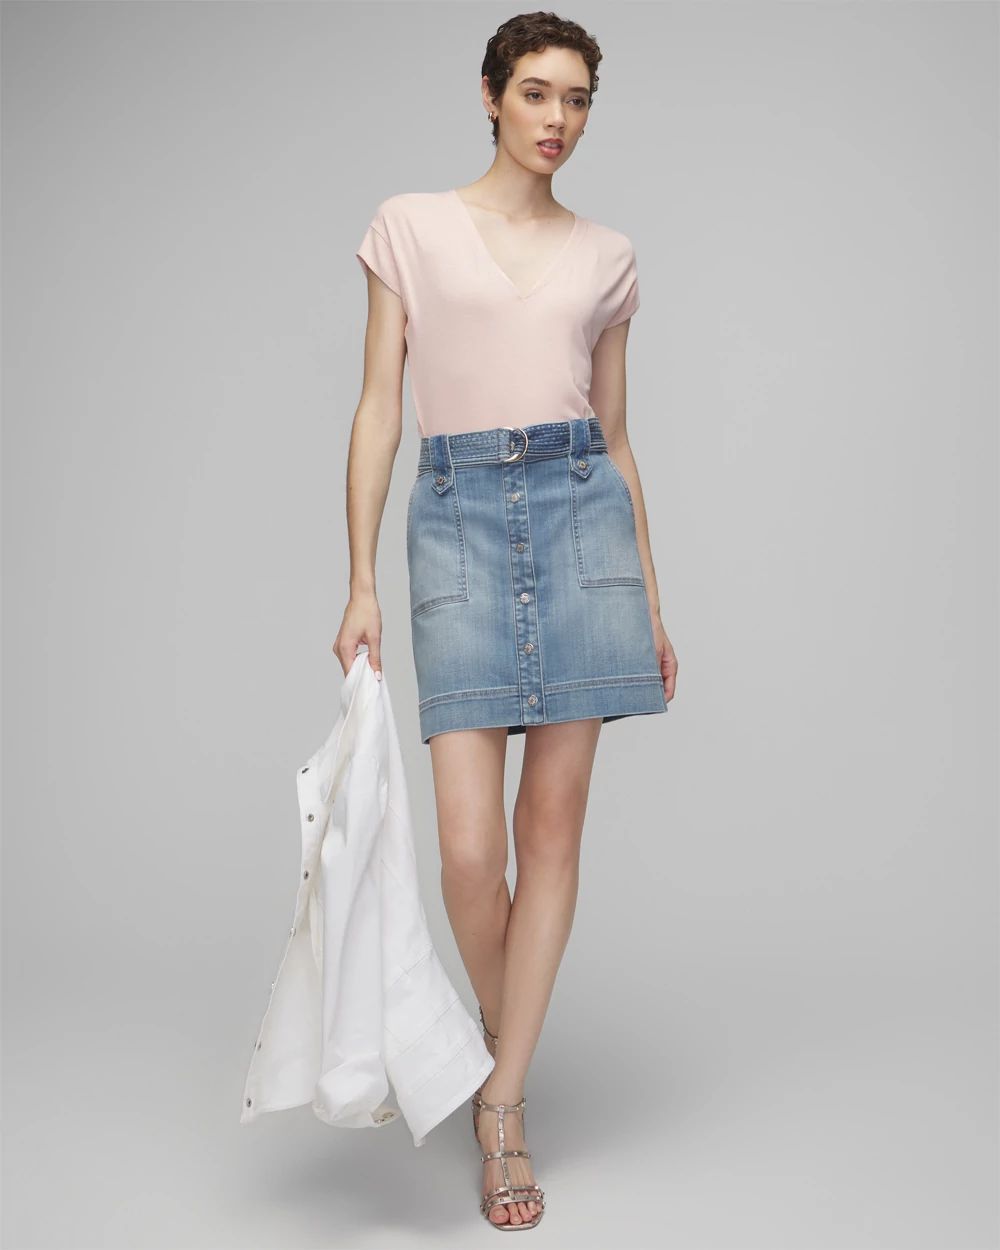 Petite Denim Utility Boot Skirt click to view larger image.